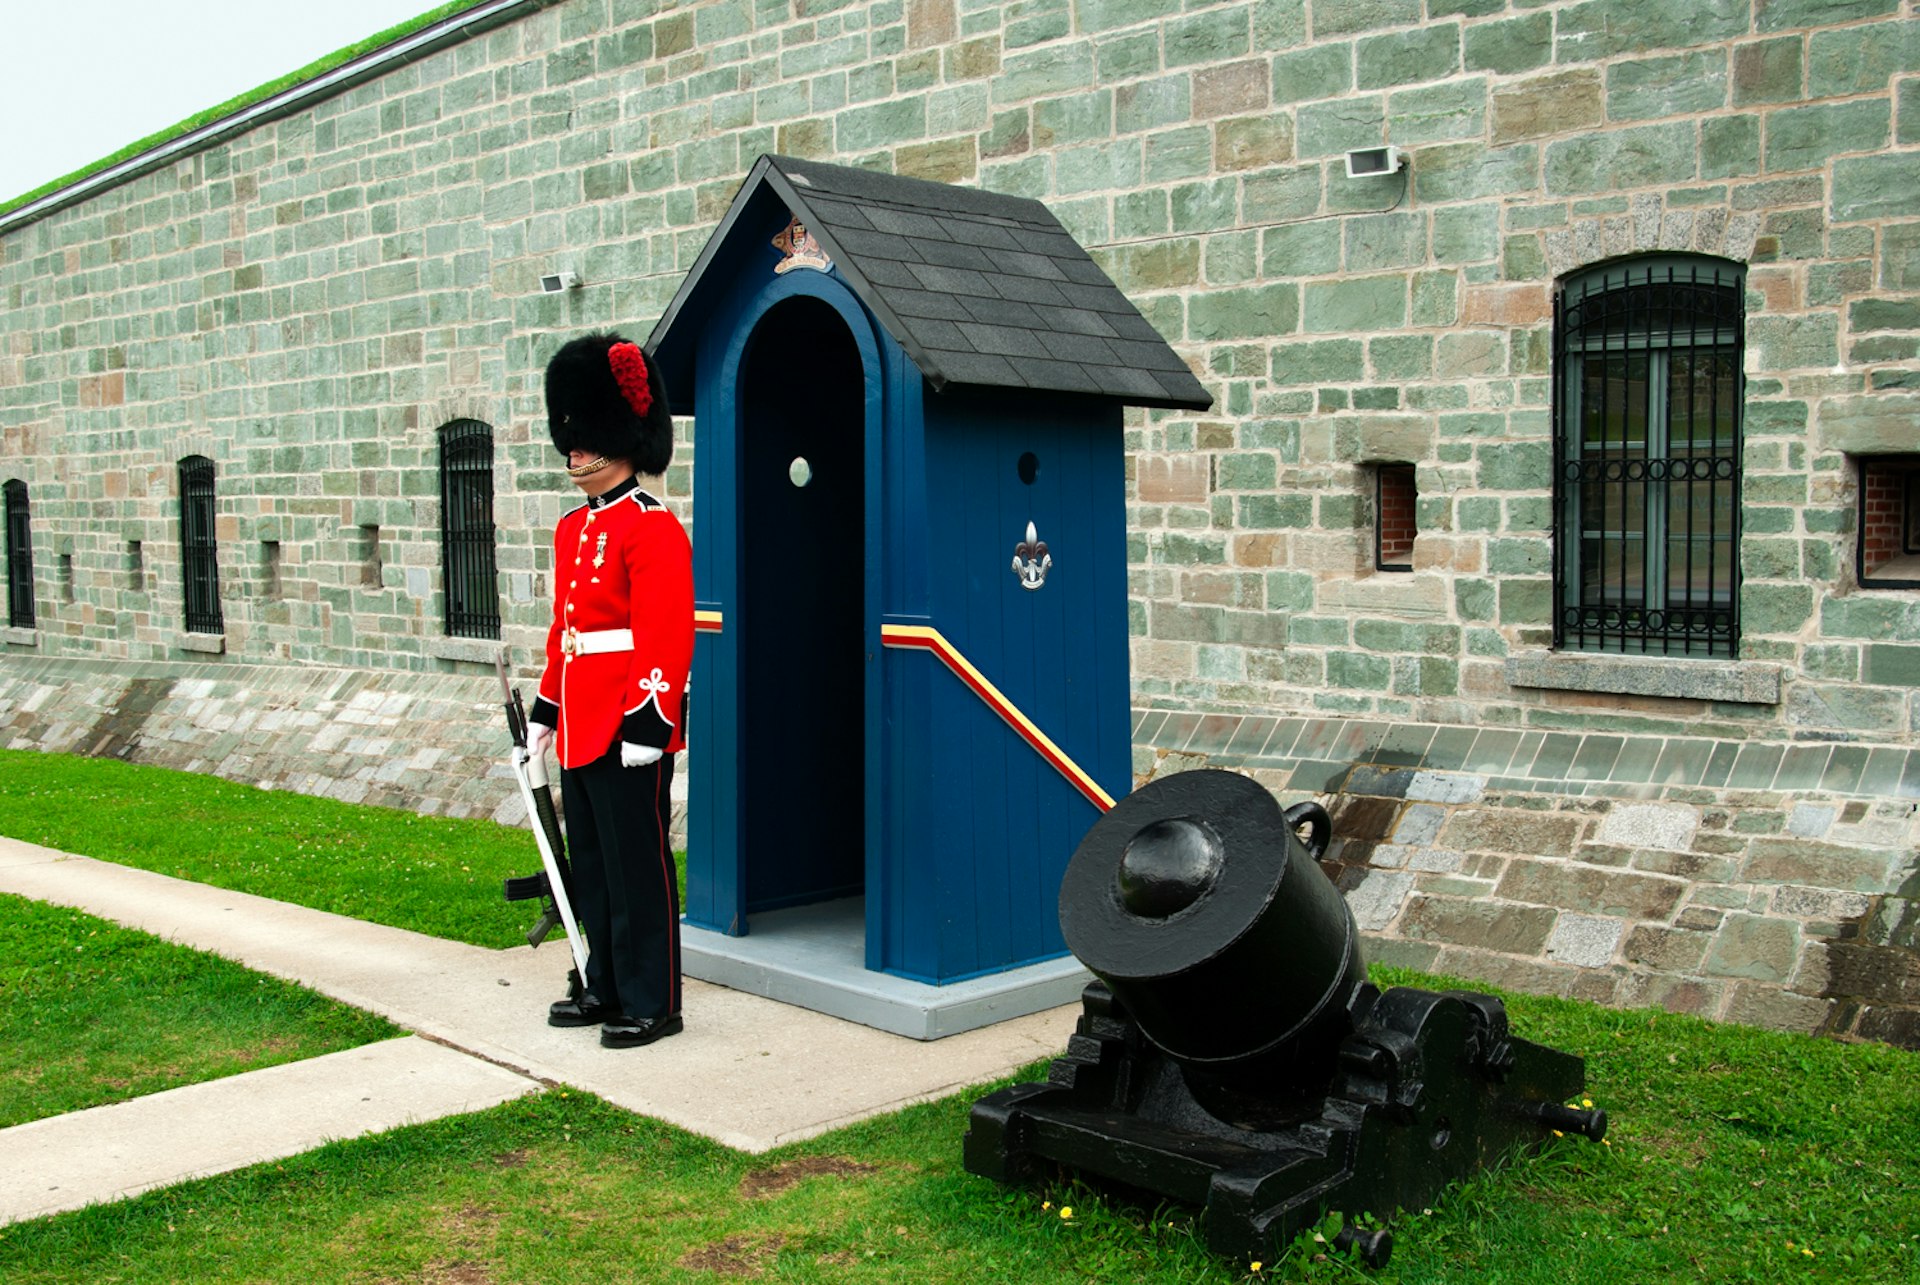 A guard with a sword in a red uniform and beaver hat stands watch at the Citadelle outside a blue shed